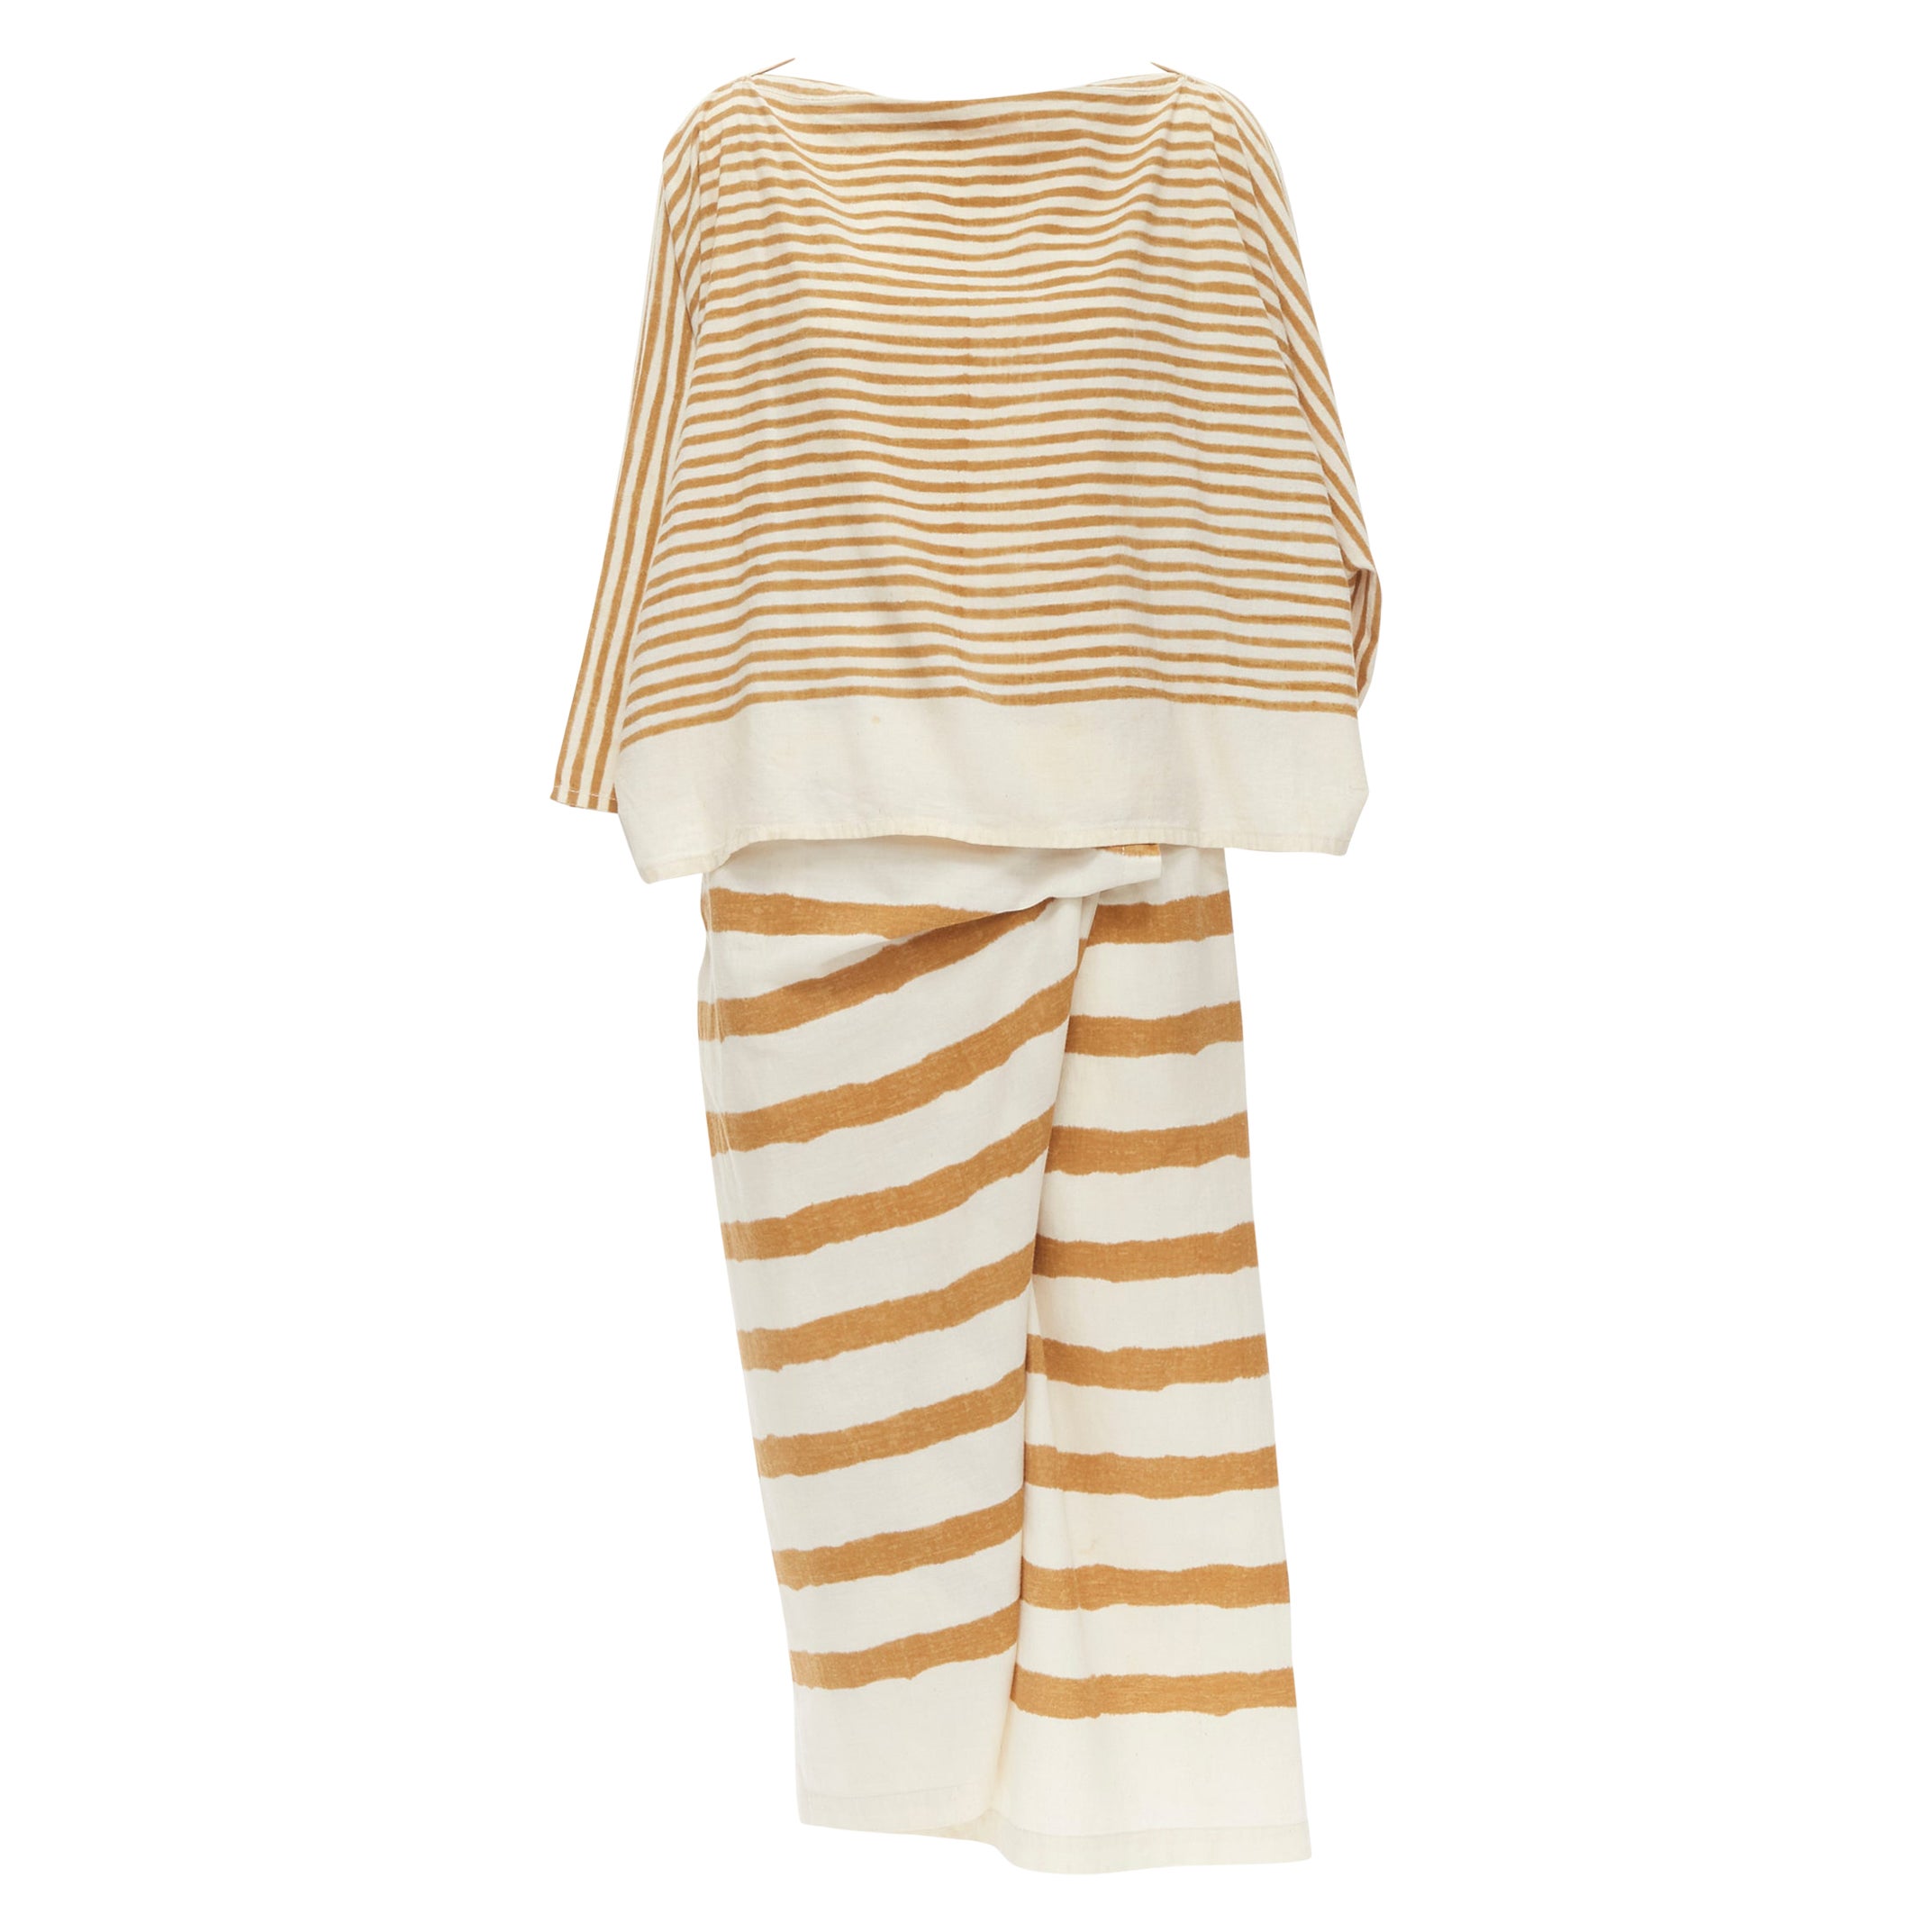 ISSEY MIYAKE 1980's Vintage beige yellow tribal stripe boxy top skirt set For Sale